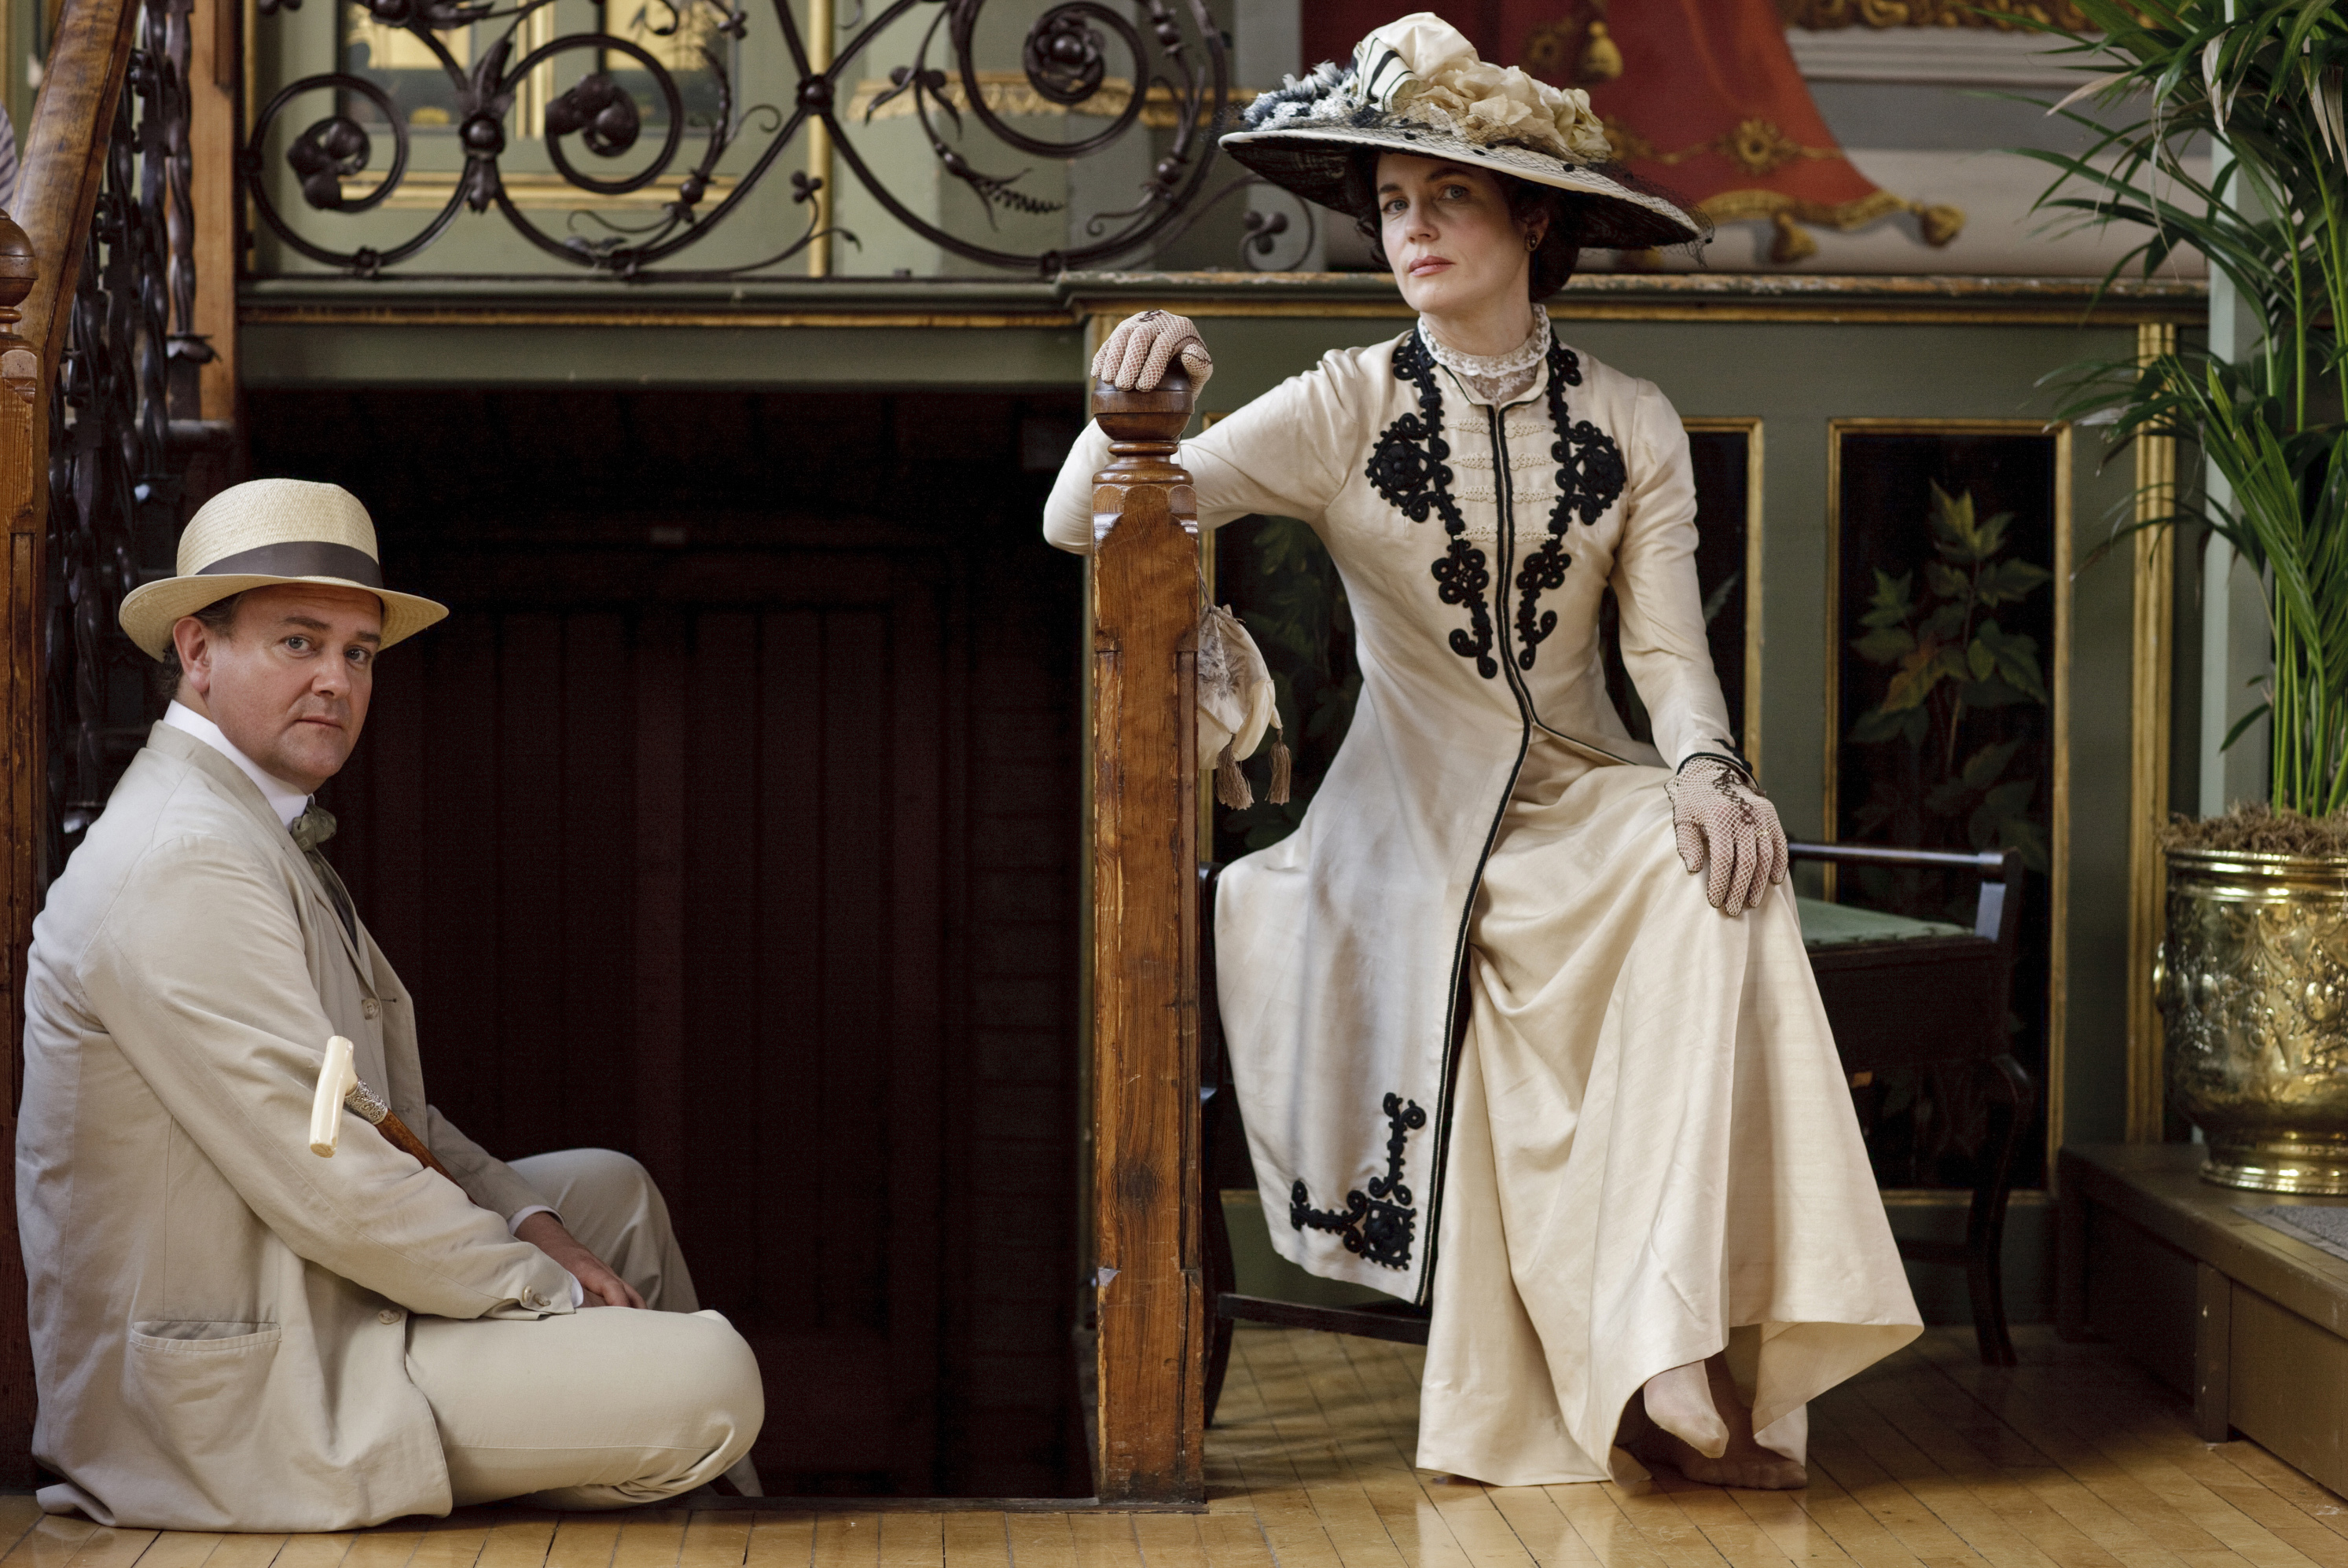 <p>Cora Crawley, Countess of Grantham (played by Elizabeth McGovern) wore clothing with an Edwardian-era influence back in 1913-1914 at a garden party she and her husband (played by Hugh Bonneville) hosted on grounds of their Downton Abbey estate during season 1 of the hit PBS drama.</p>